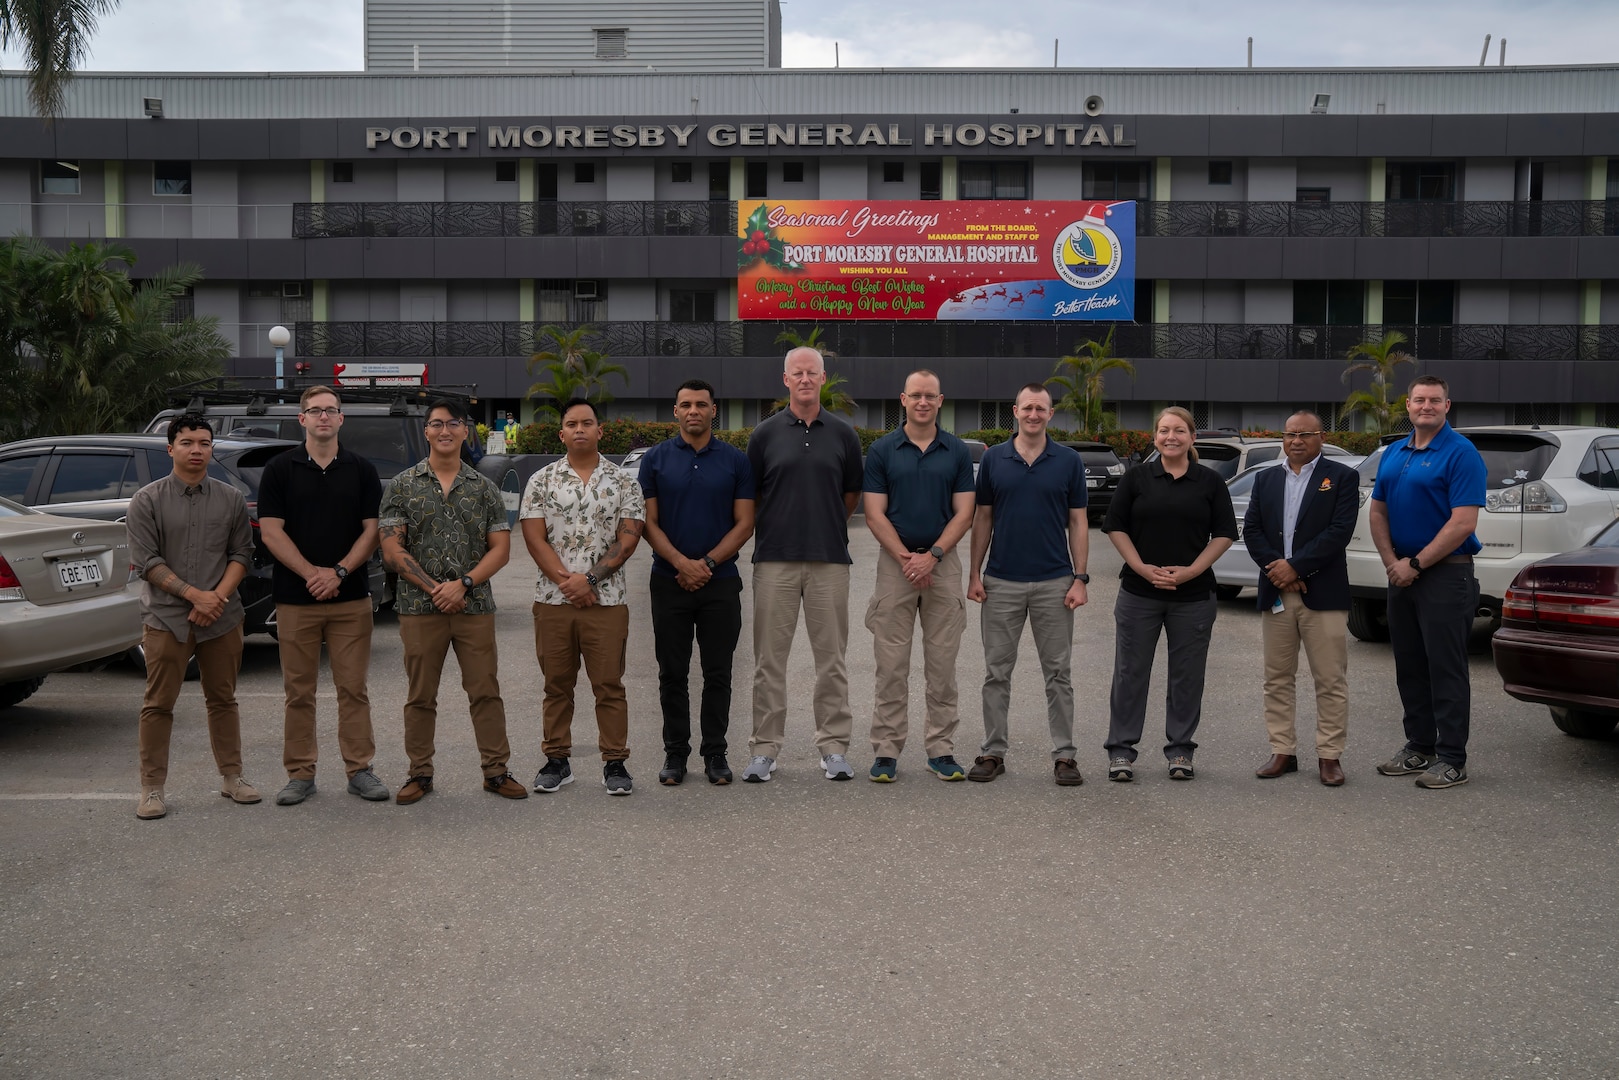 Members of the U.S. Army's 8th Forward Resuscitative and Surgical Detachment, 18th Medical Command, (2nd from the right) Port Moresby General Hospital Director of Medical Services Dr. Kone Sobi, and U.S. Army Maj. Levi Daugherty, trauma surgeon, Brooke Army Medical Center, pose for a group photo during the inaugural Papua New Guinea Trauma Rotation at Port Moresby General Hospital at Port Moresby, Papua New Guinea, Dec. 7, 2023. The Trauma Rotation follows the recent signing of the Defense Cooperation Agreement between the U.S. and Papua New Guinea; it is a first-of-its-kind engagement between the U.S. Army and Papua New Guinea, which mutually offers parties the a chance to exchange medical expertise and techniques in an austere environment. (U.S. Army photo by Sgt. 1st Class Timothy Hughes/Released)